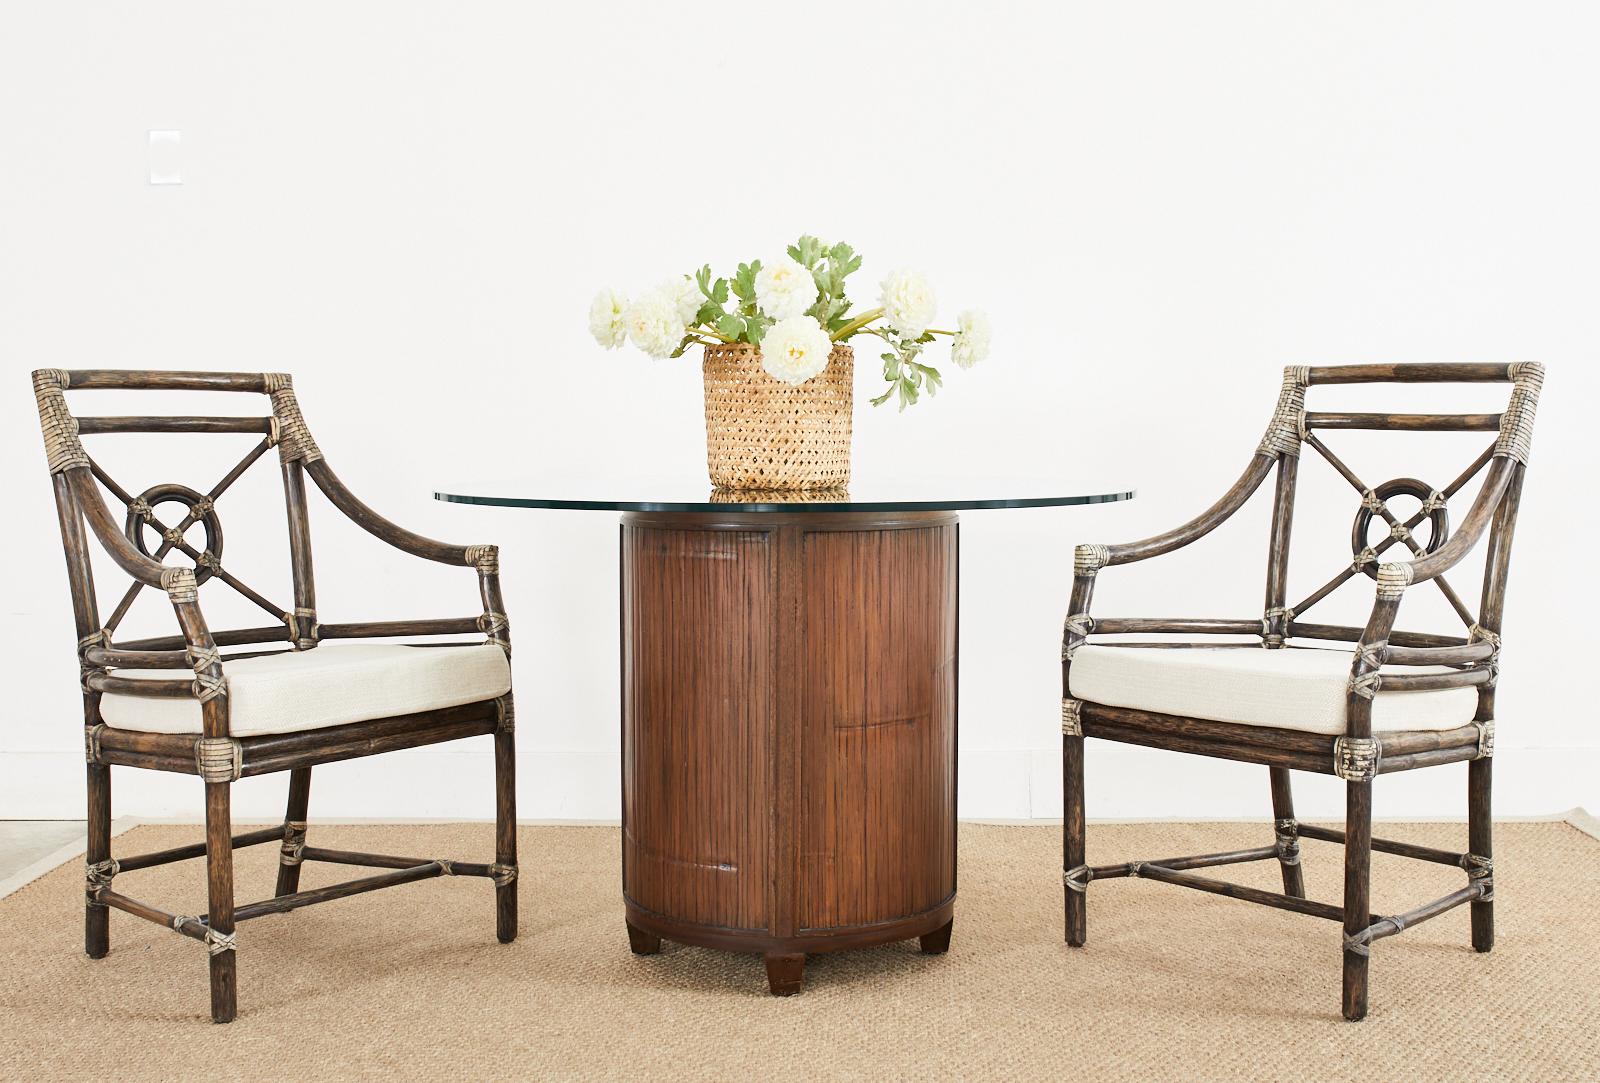 Handsome round pedestal dining table or center table made by McGuire. The table features a cylindrical form with bamboo rattan veneer on the sides and top in a dark rich finish. Made in the California organic modern style topped with a round pane of